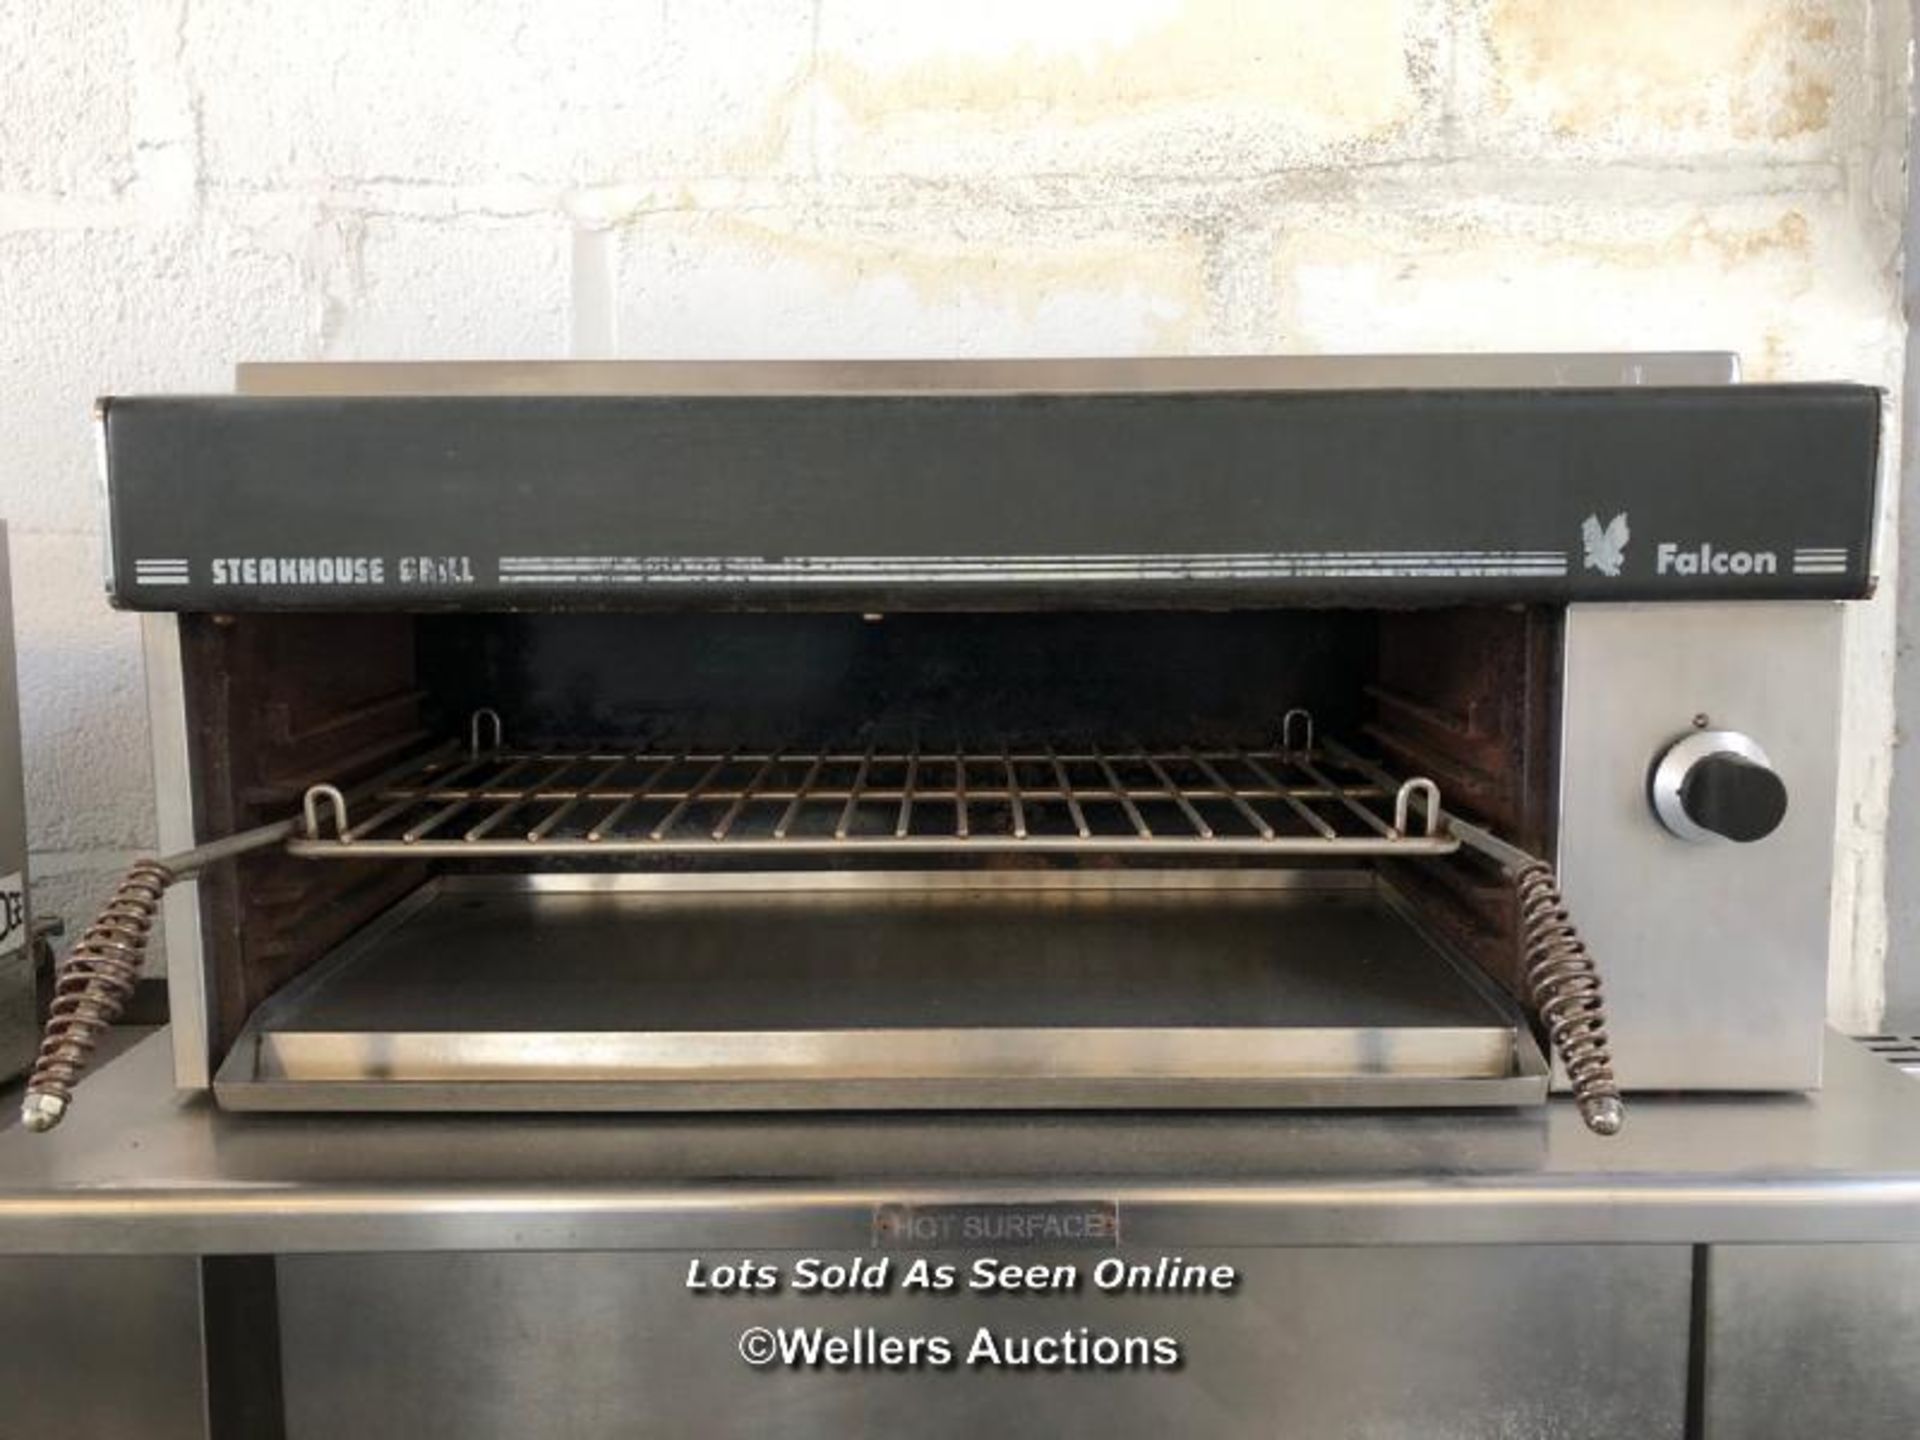 LINCAT GAS COMBI OVEN WITH DUAL BURNER GRILL AND FALCON G1532 STEAKHOUSE GRILL, TOTAL DIMENSIONS: - Image 4 of 7